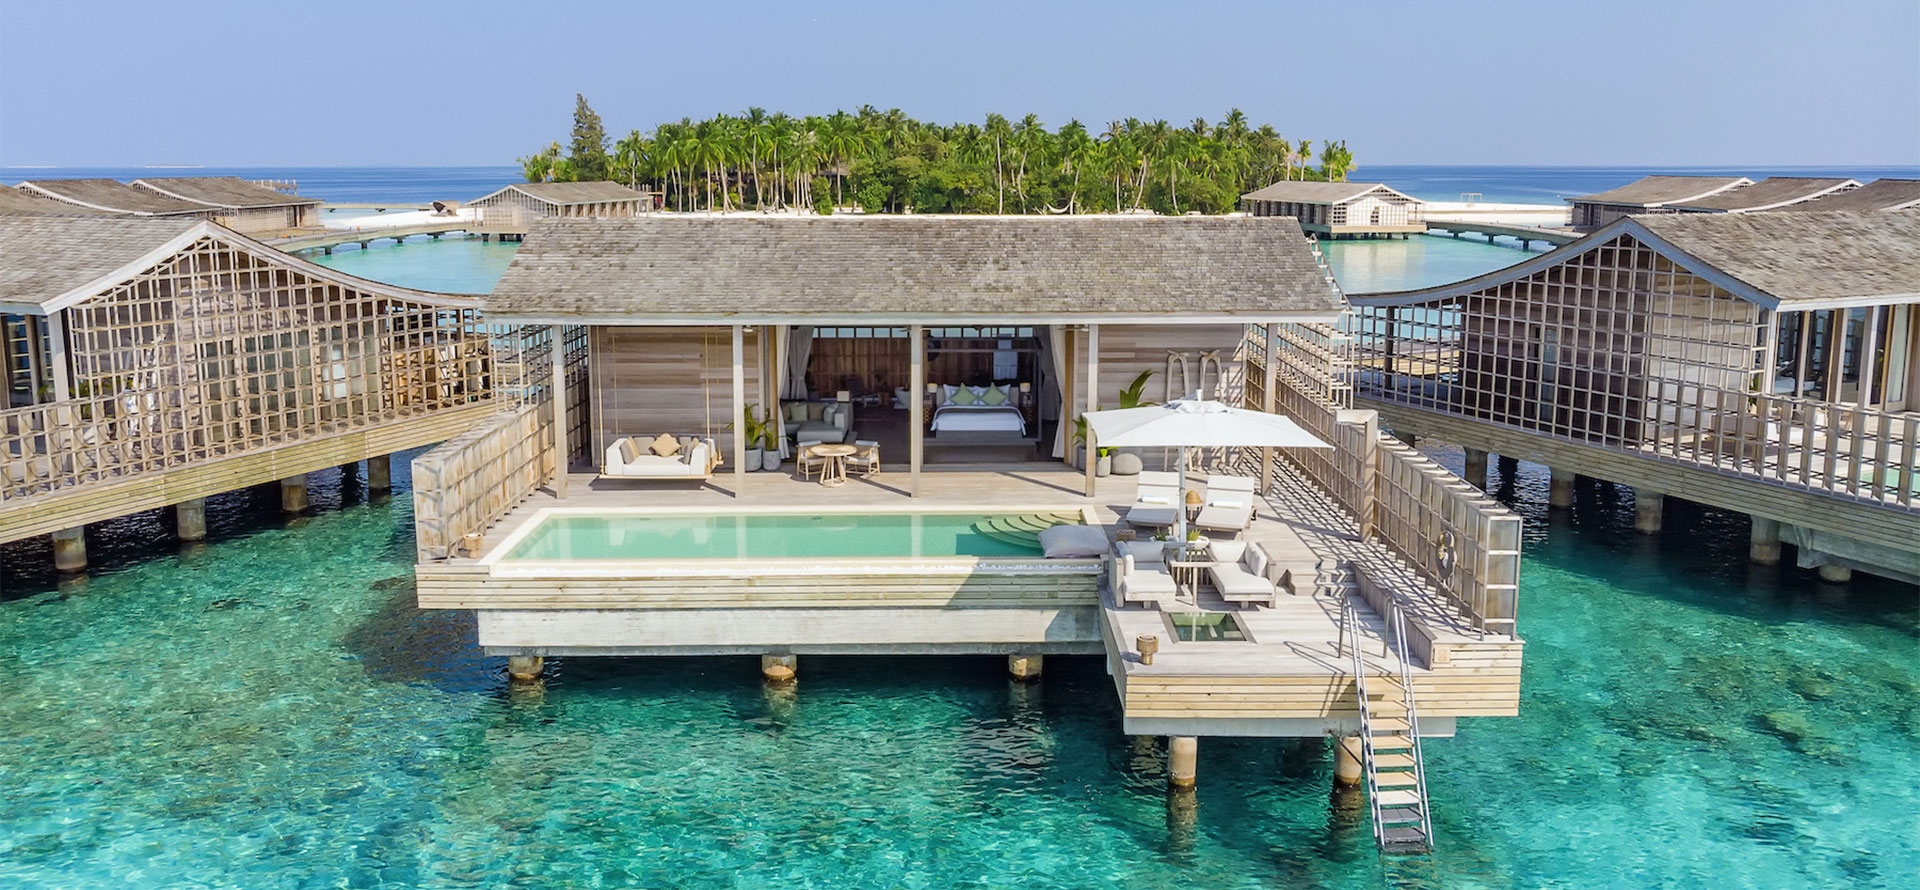 Maldives overwater bungalows.